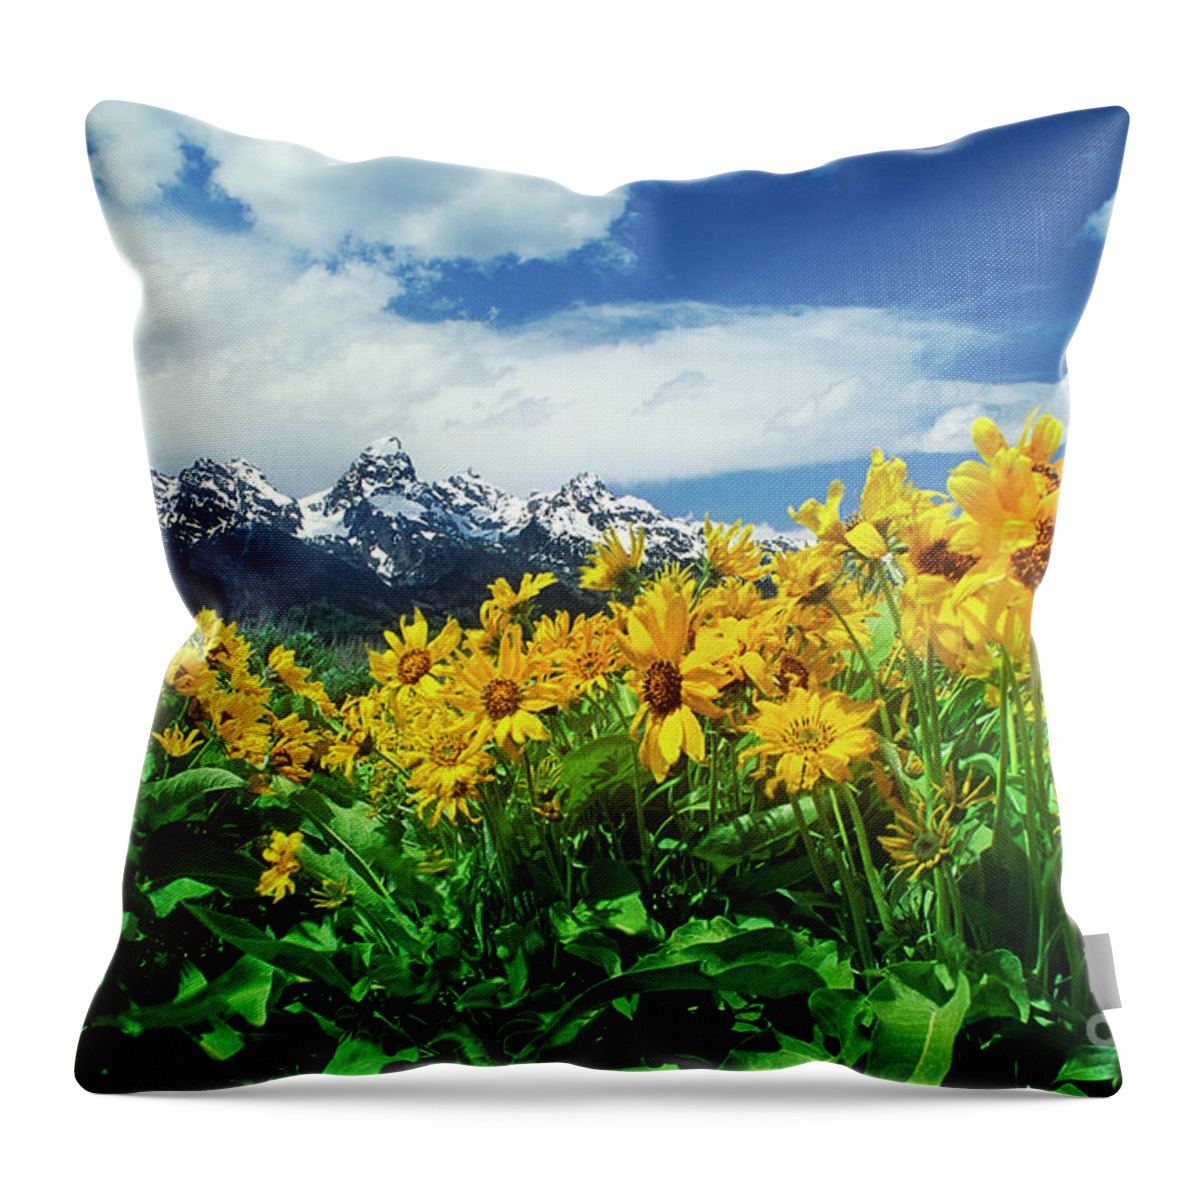 Dave Welling Throw Pillow featuring the photograph Arrowleaf Balsamroot Grand Tetons National Park Wyoming by Dave Welling